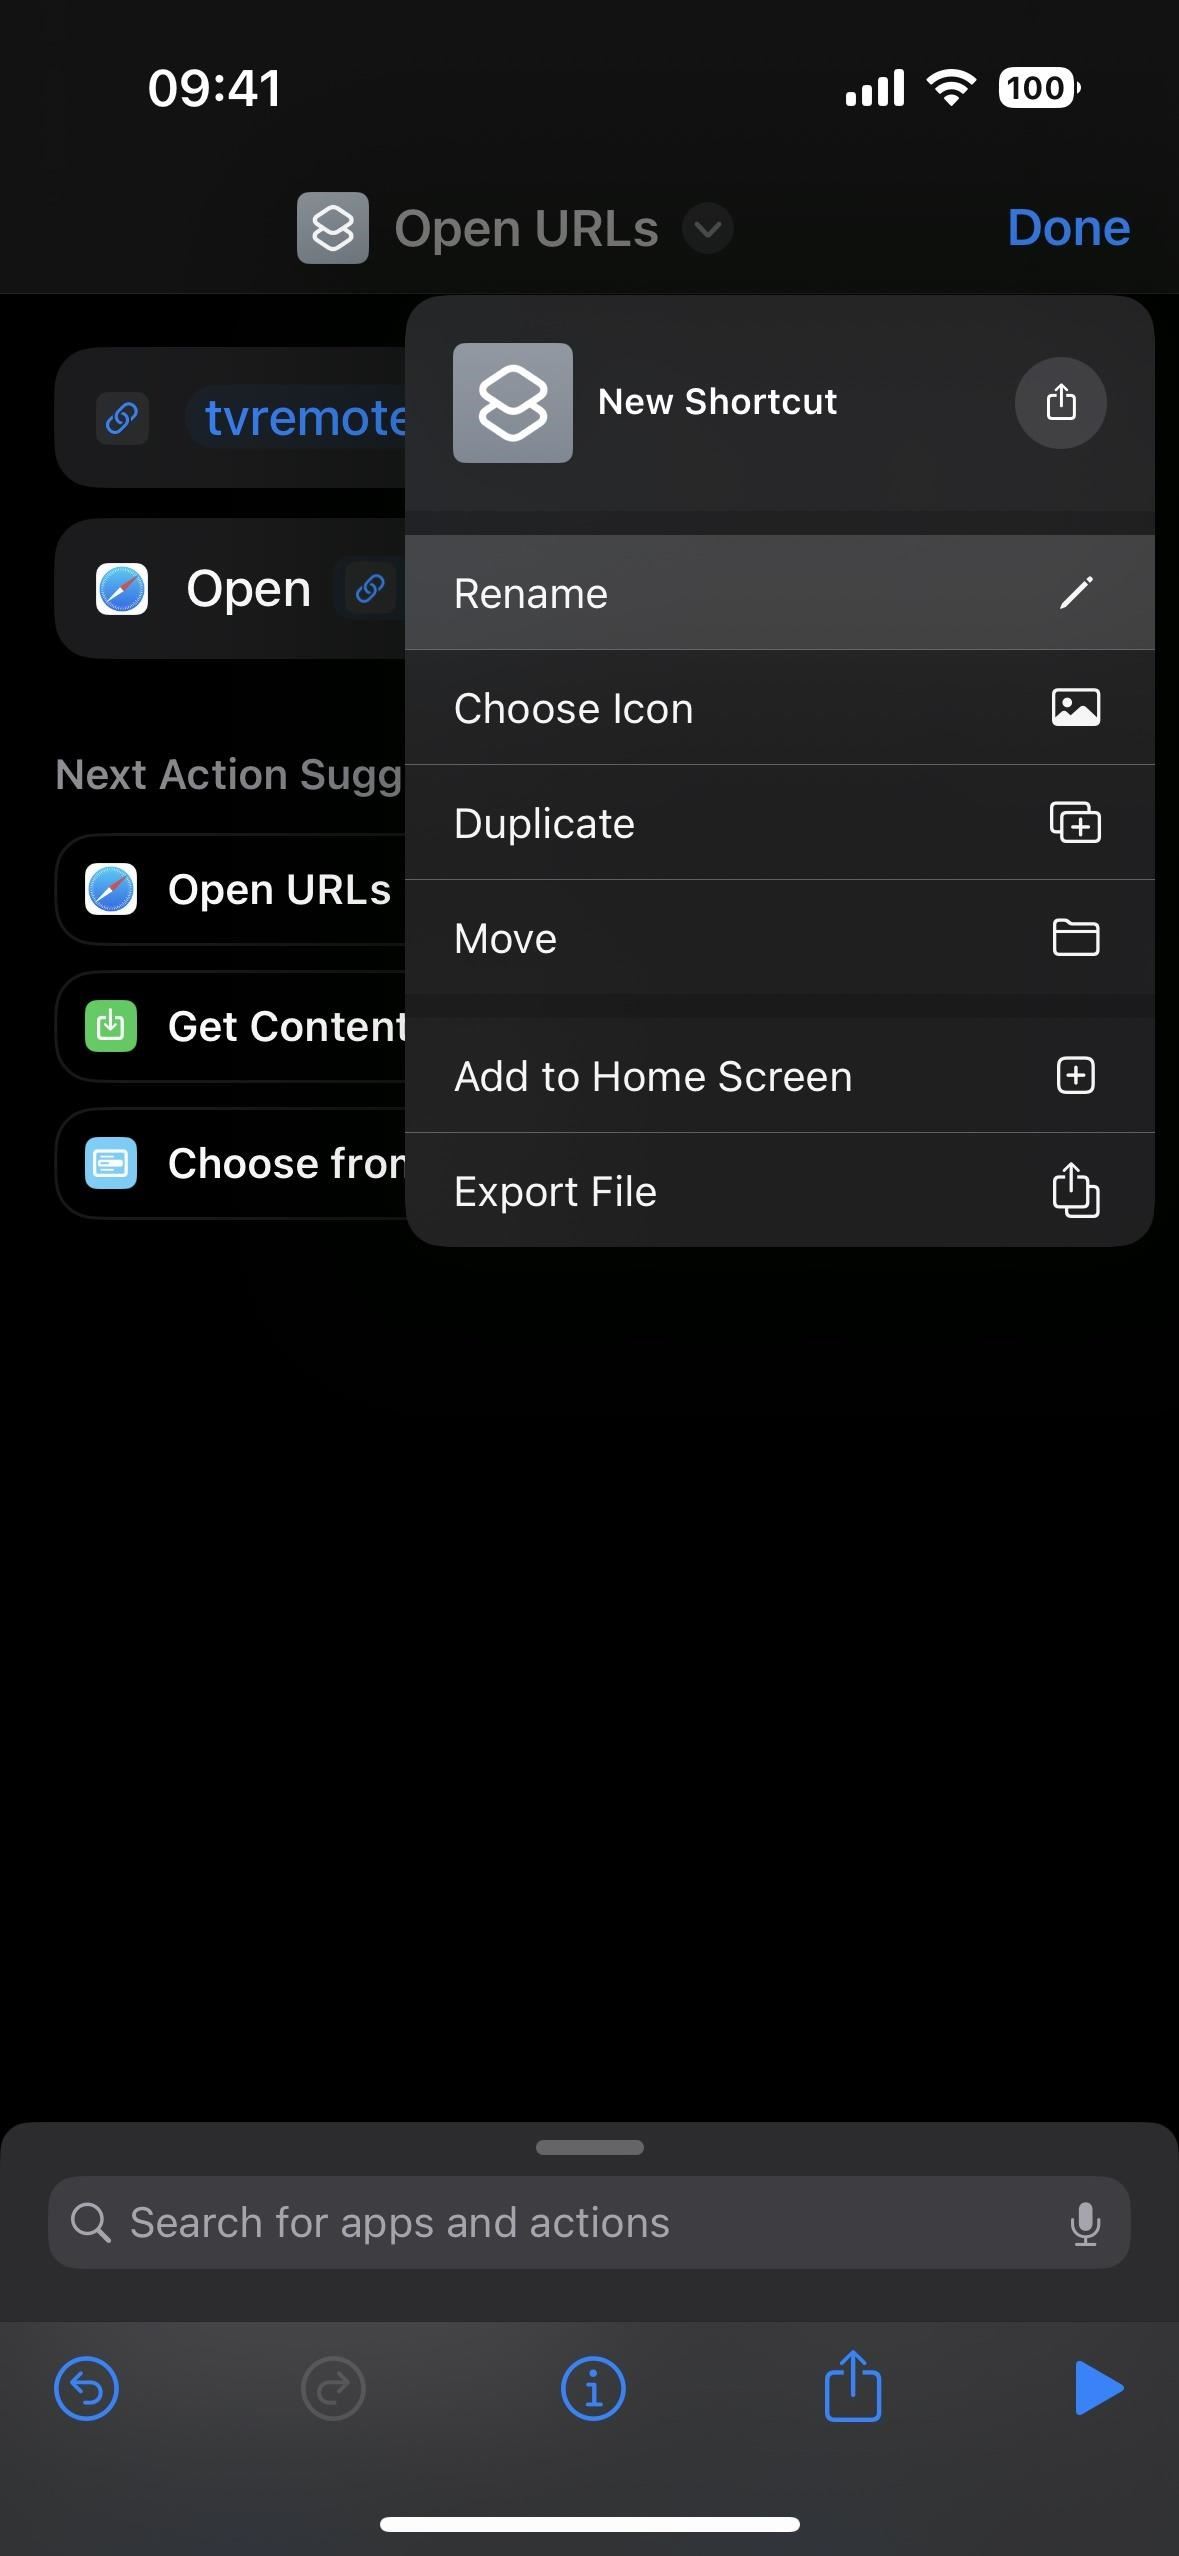 Unlock Your iPhone's Secret Apple TV Remote App for Home Screen, App Library, Siri, and More — No Control Center Needed